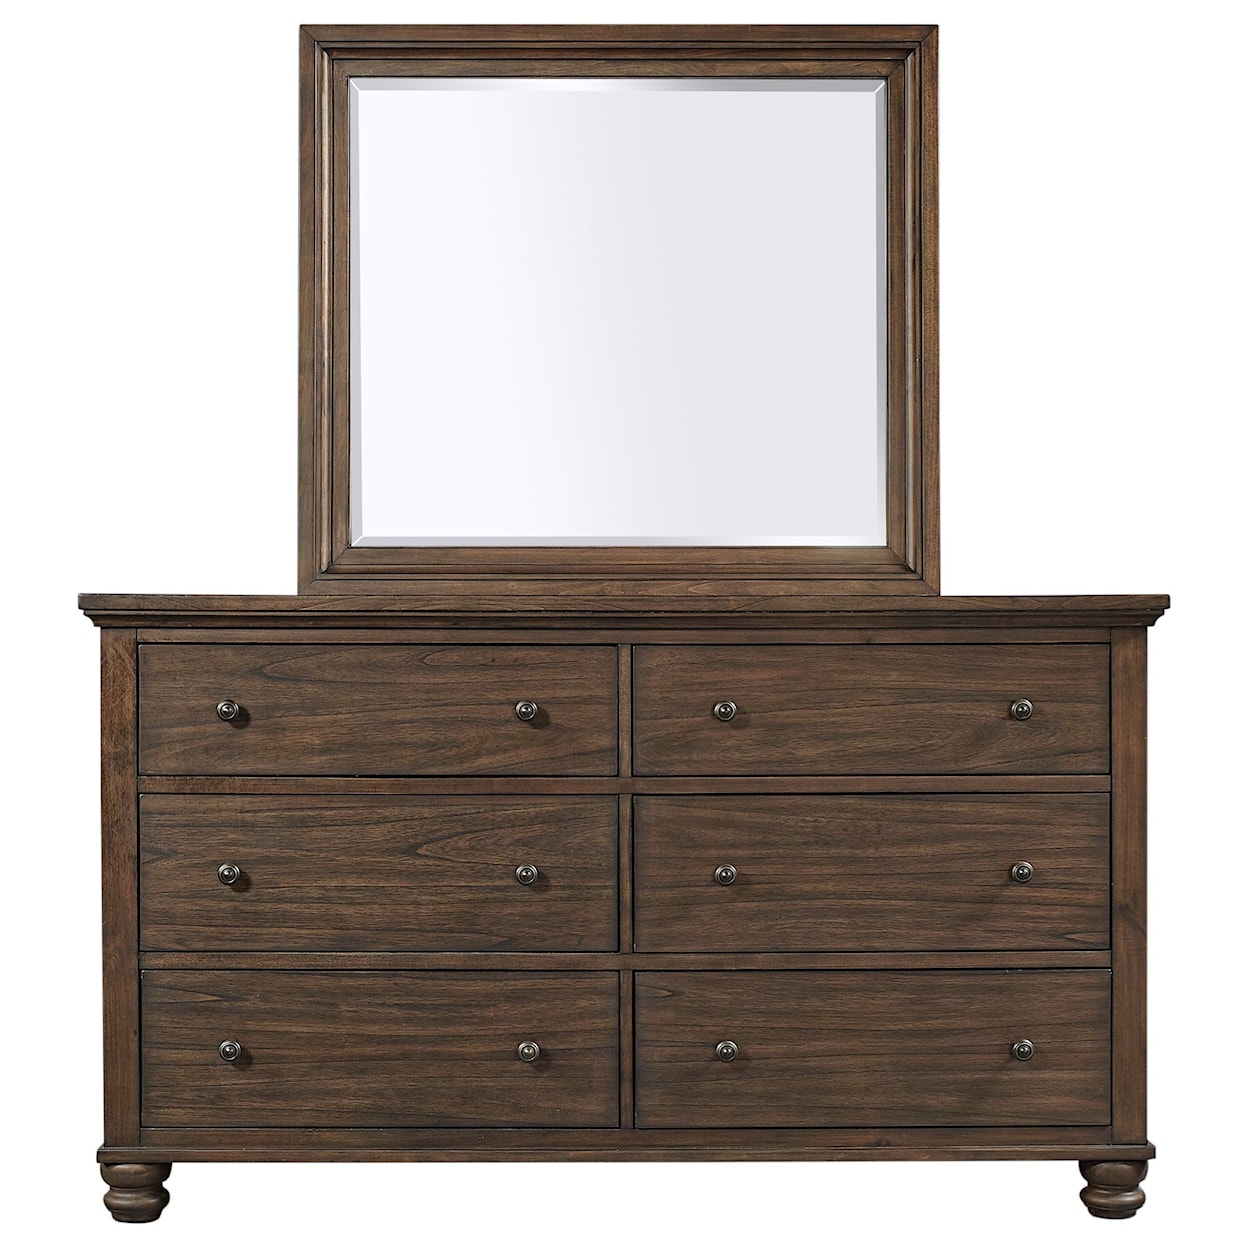 Aspenhome Hudson Valley Dresser and Mirror Combination